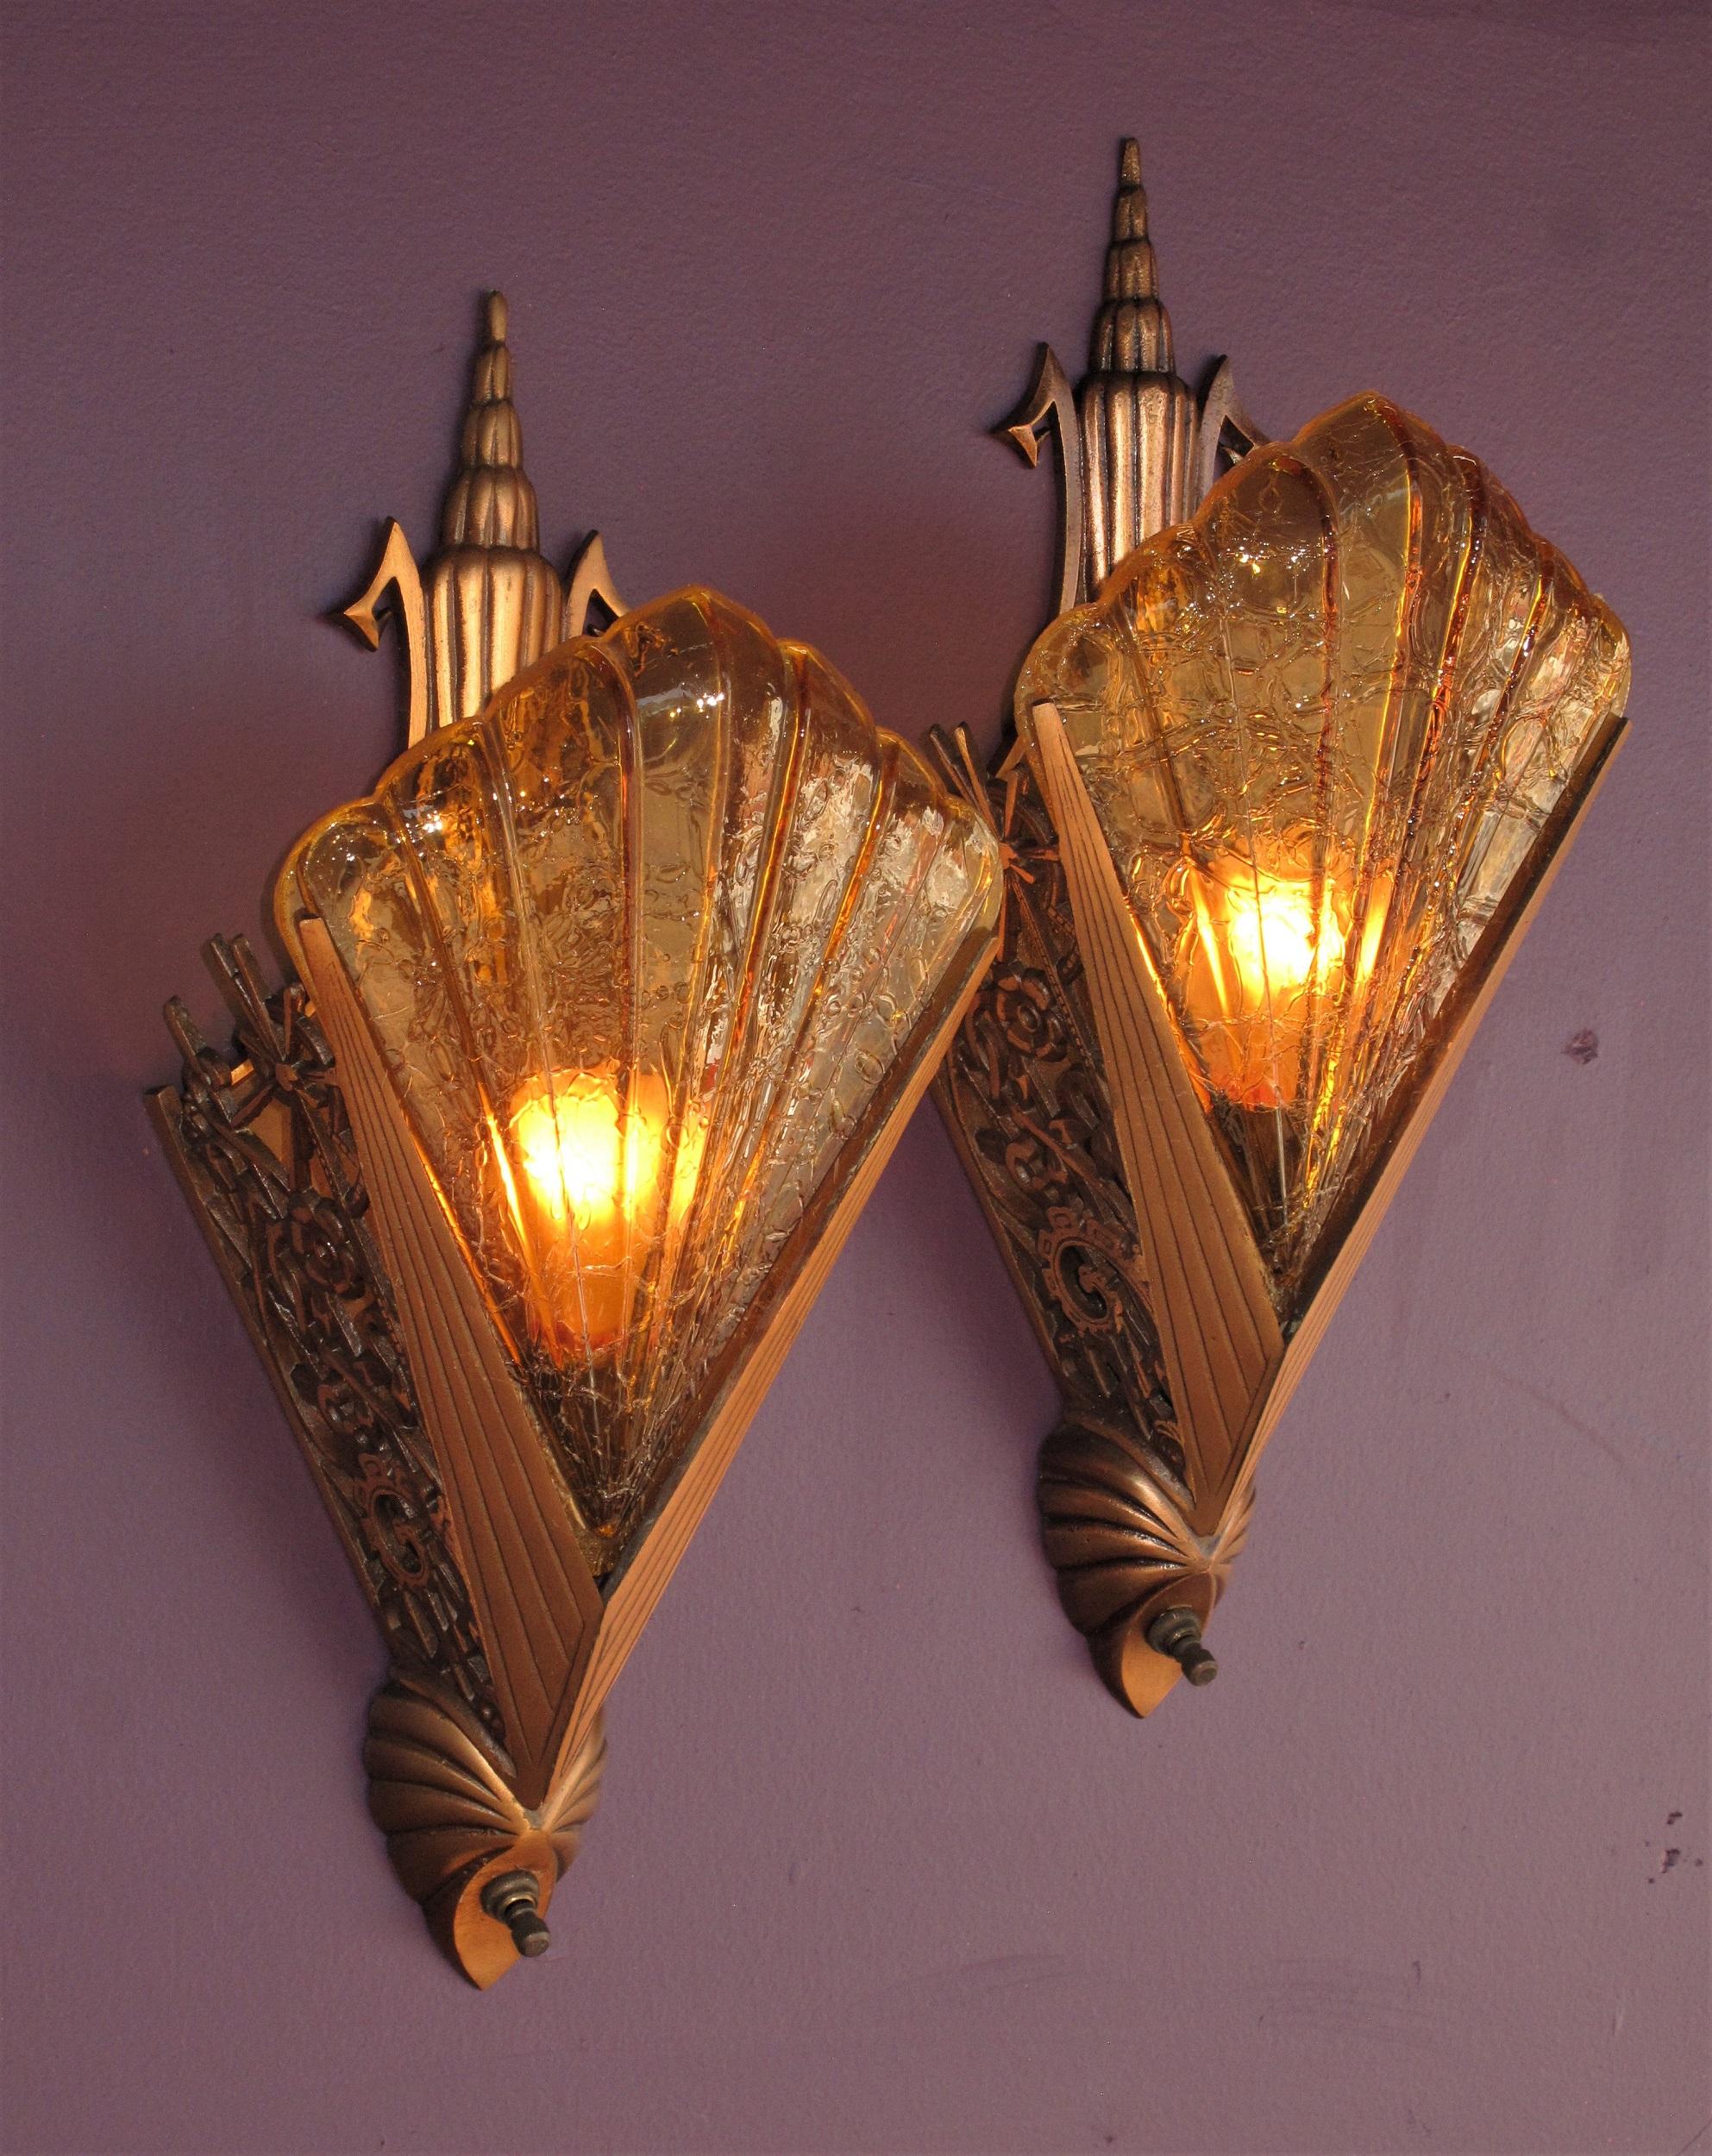 2 pair available. Priced per pair.
Rare & desirable vintage bronze deco sconces with honey colored slip shades .
One of the most sought after (and rare) pairs of vintage Art Deco wall sconce fixtures with original patina and shades. These American